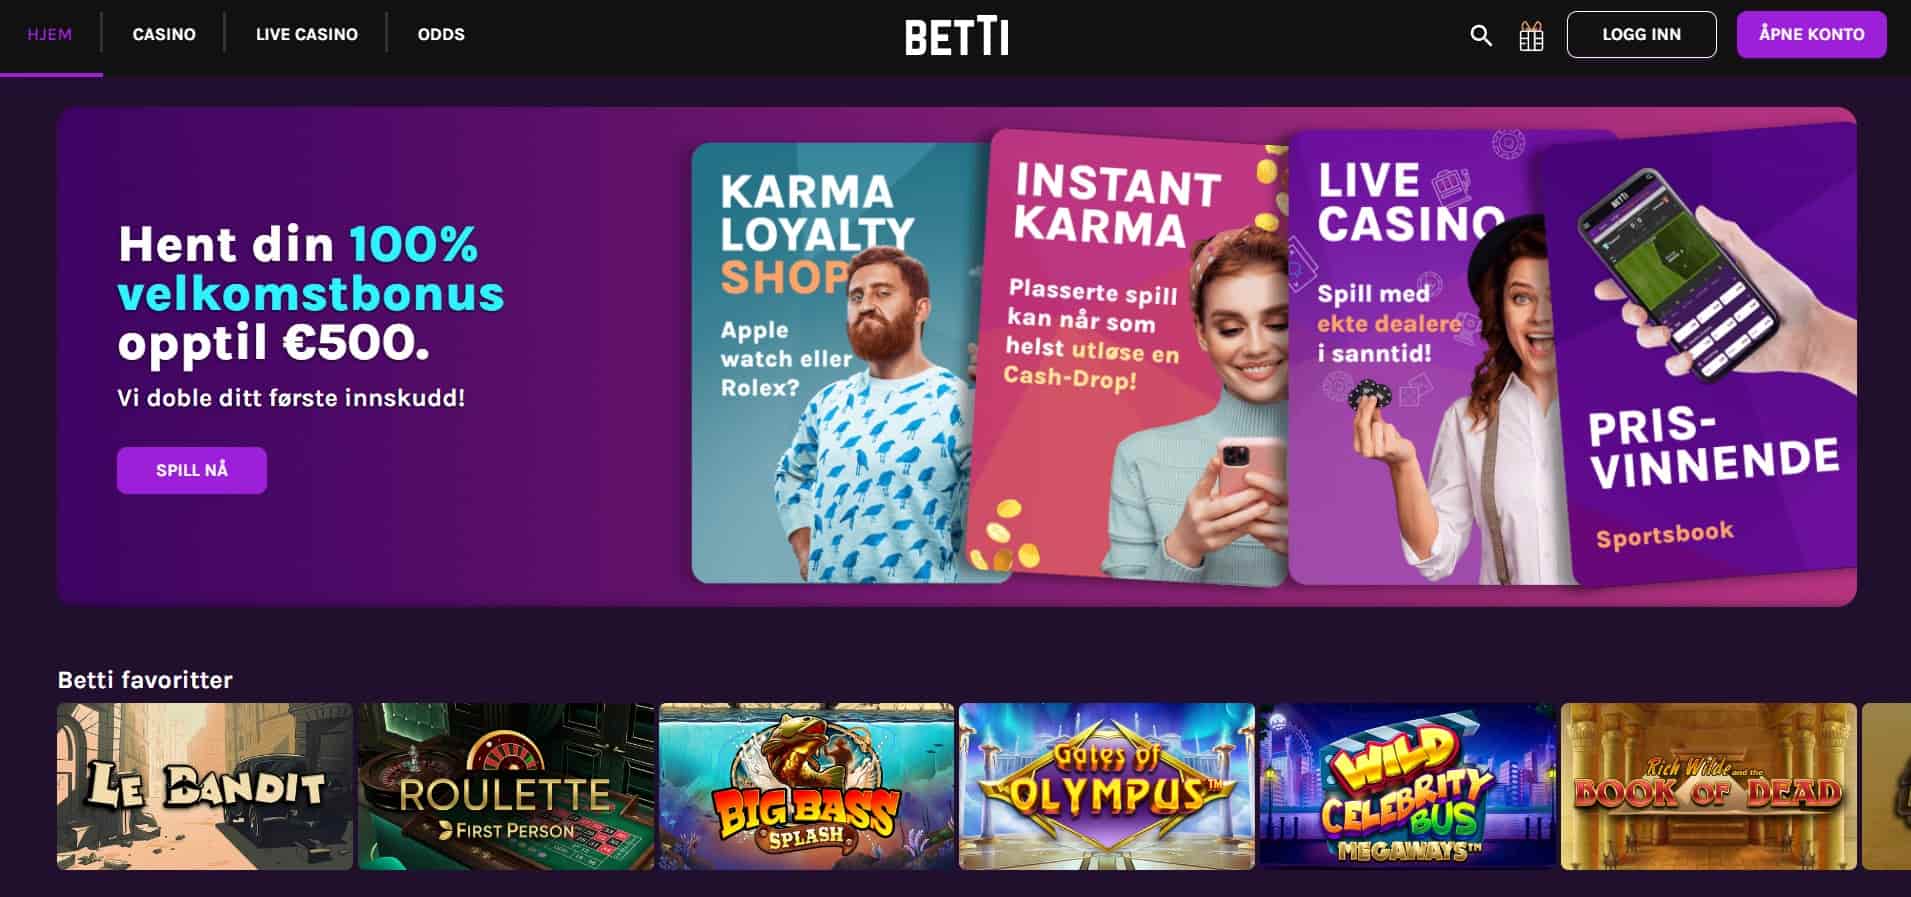 betti review